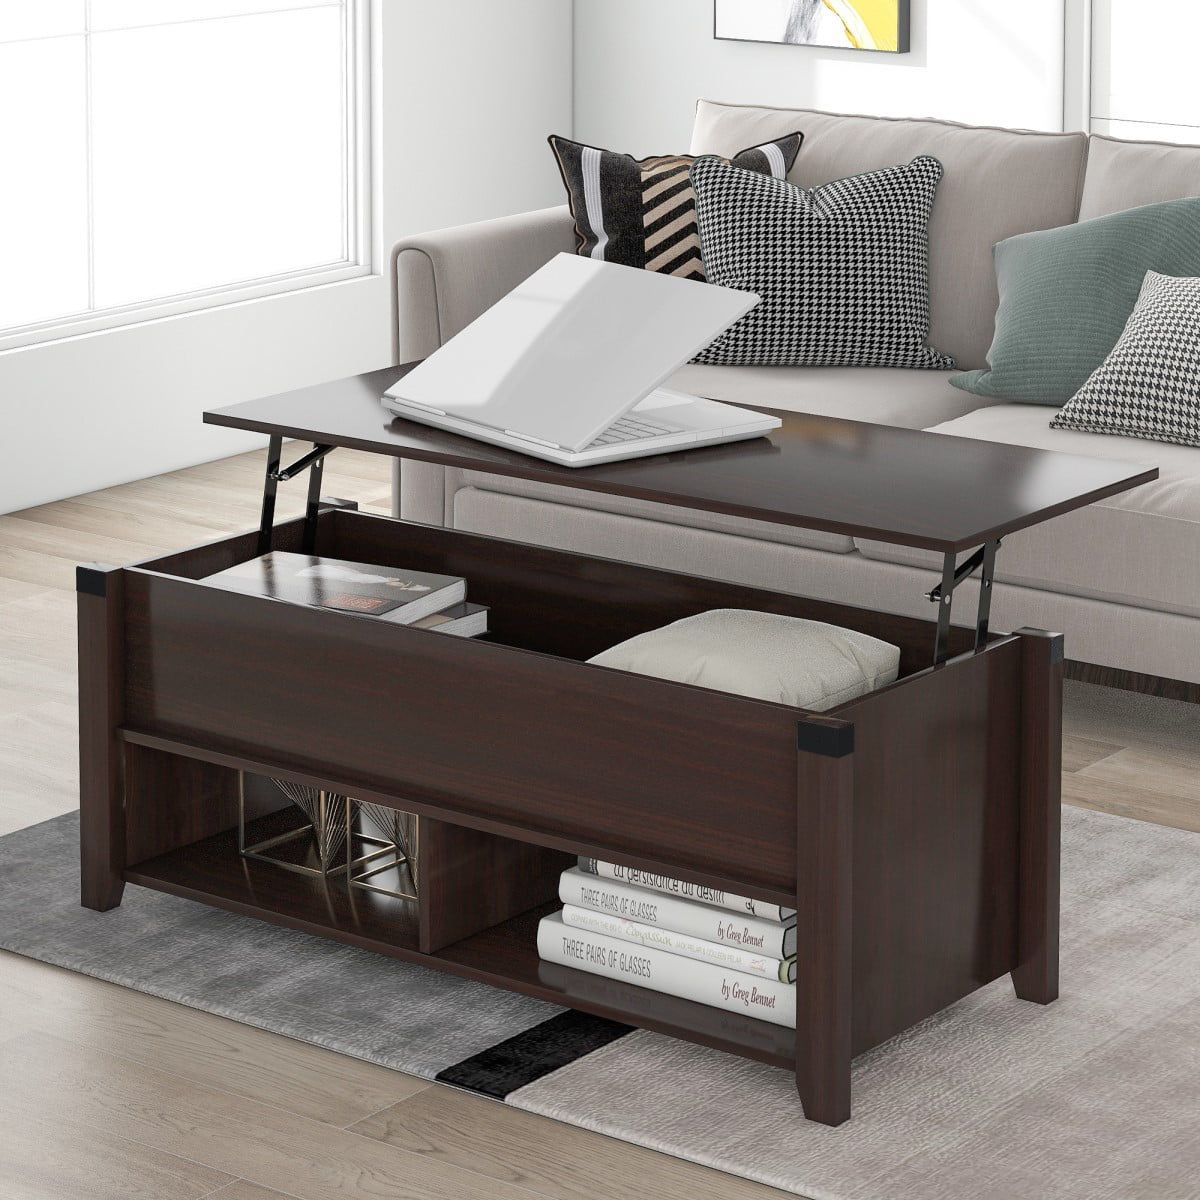 Small Space Lift Top Coffee Table With 2 Storage Compartments, Espresso For Lift Top Coffee Tables With Hidden Storage Compartments (View 9 of 20)